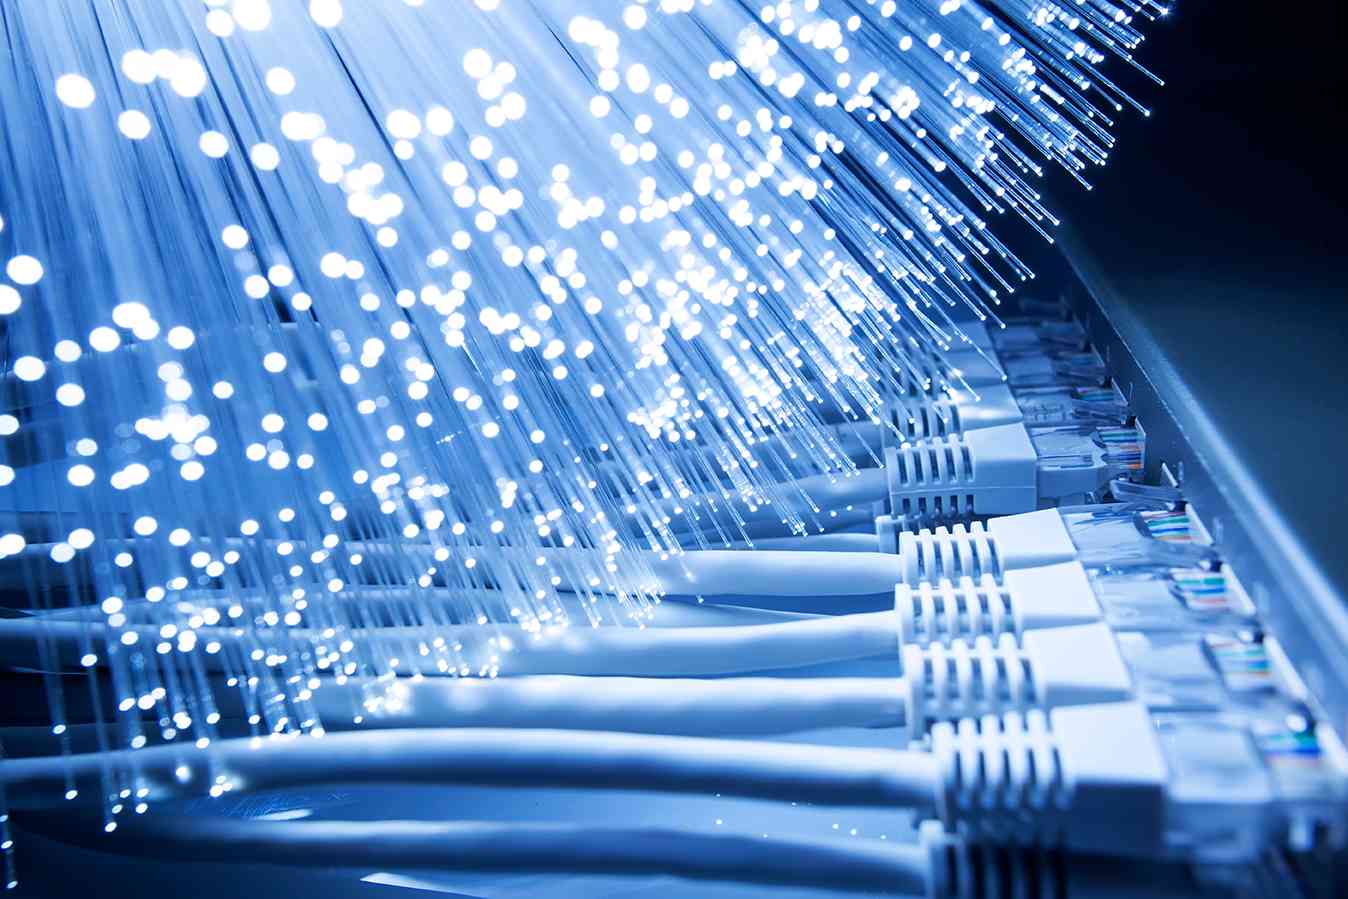 End-to-end fiber-based connectivity